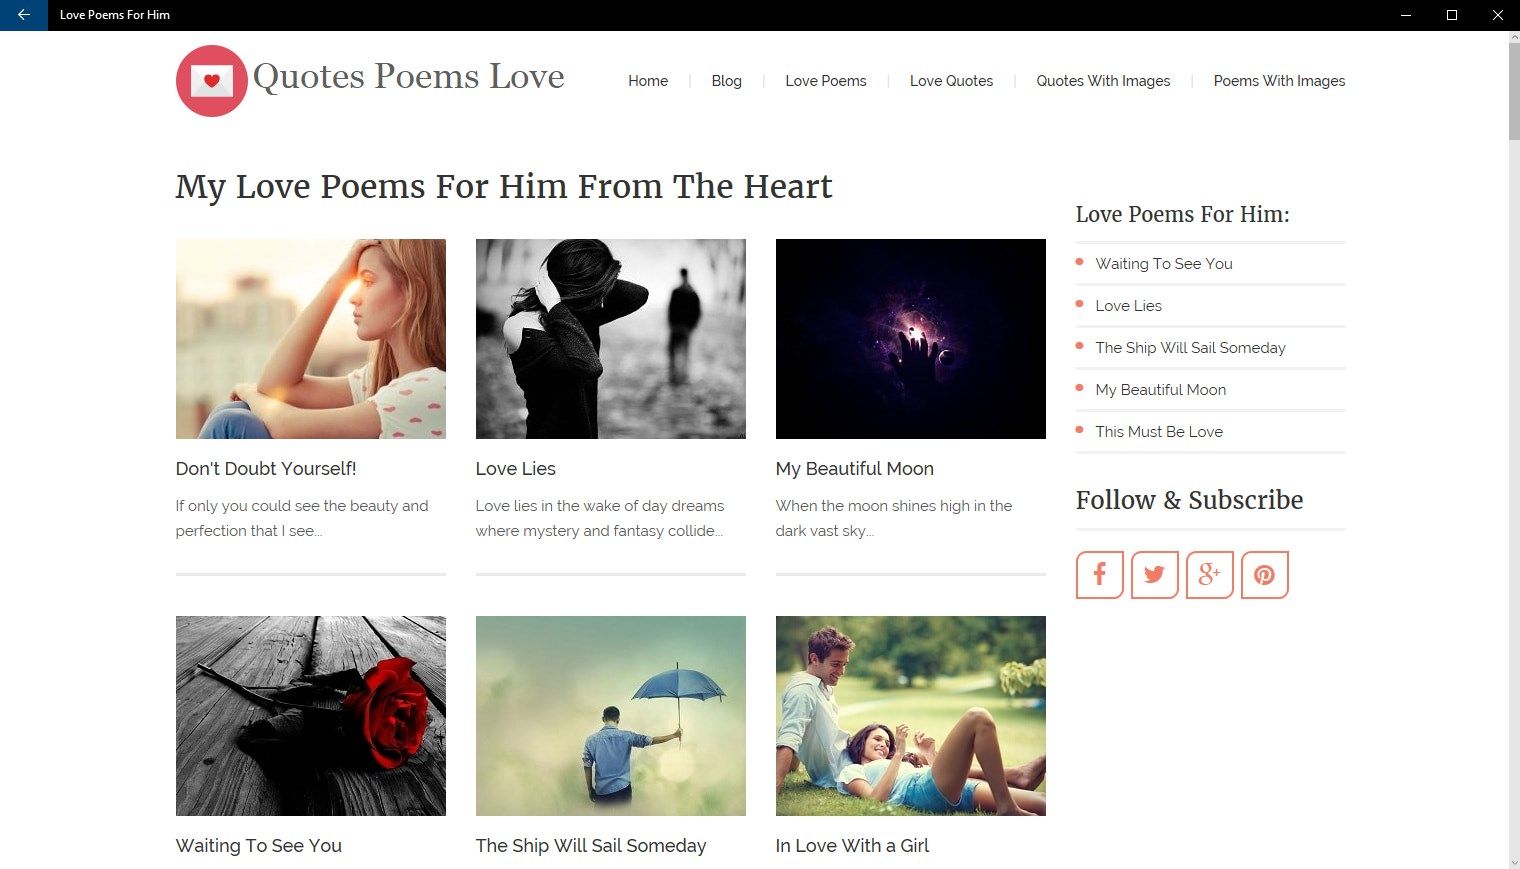 Love Poems For Him